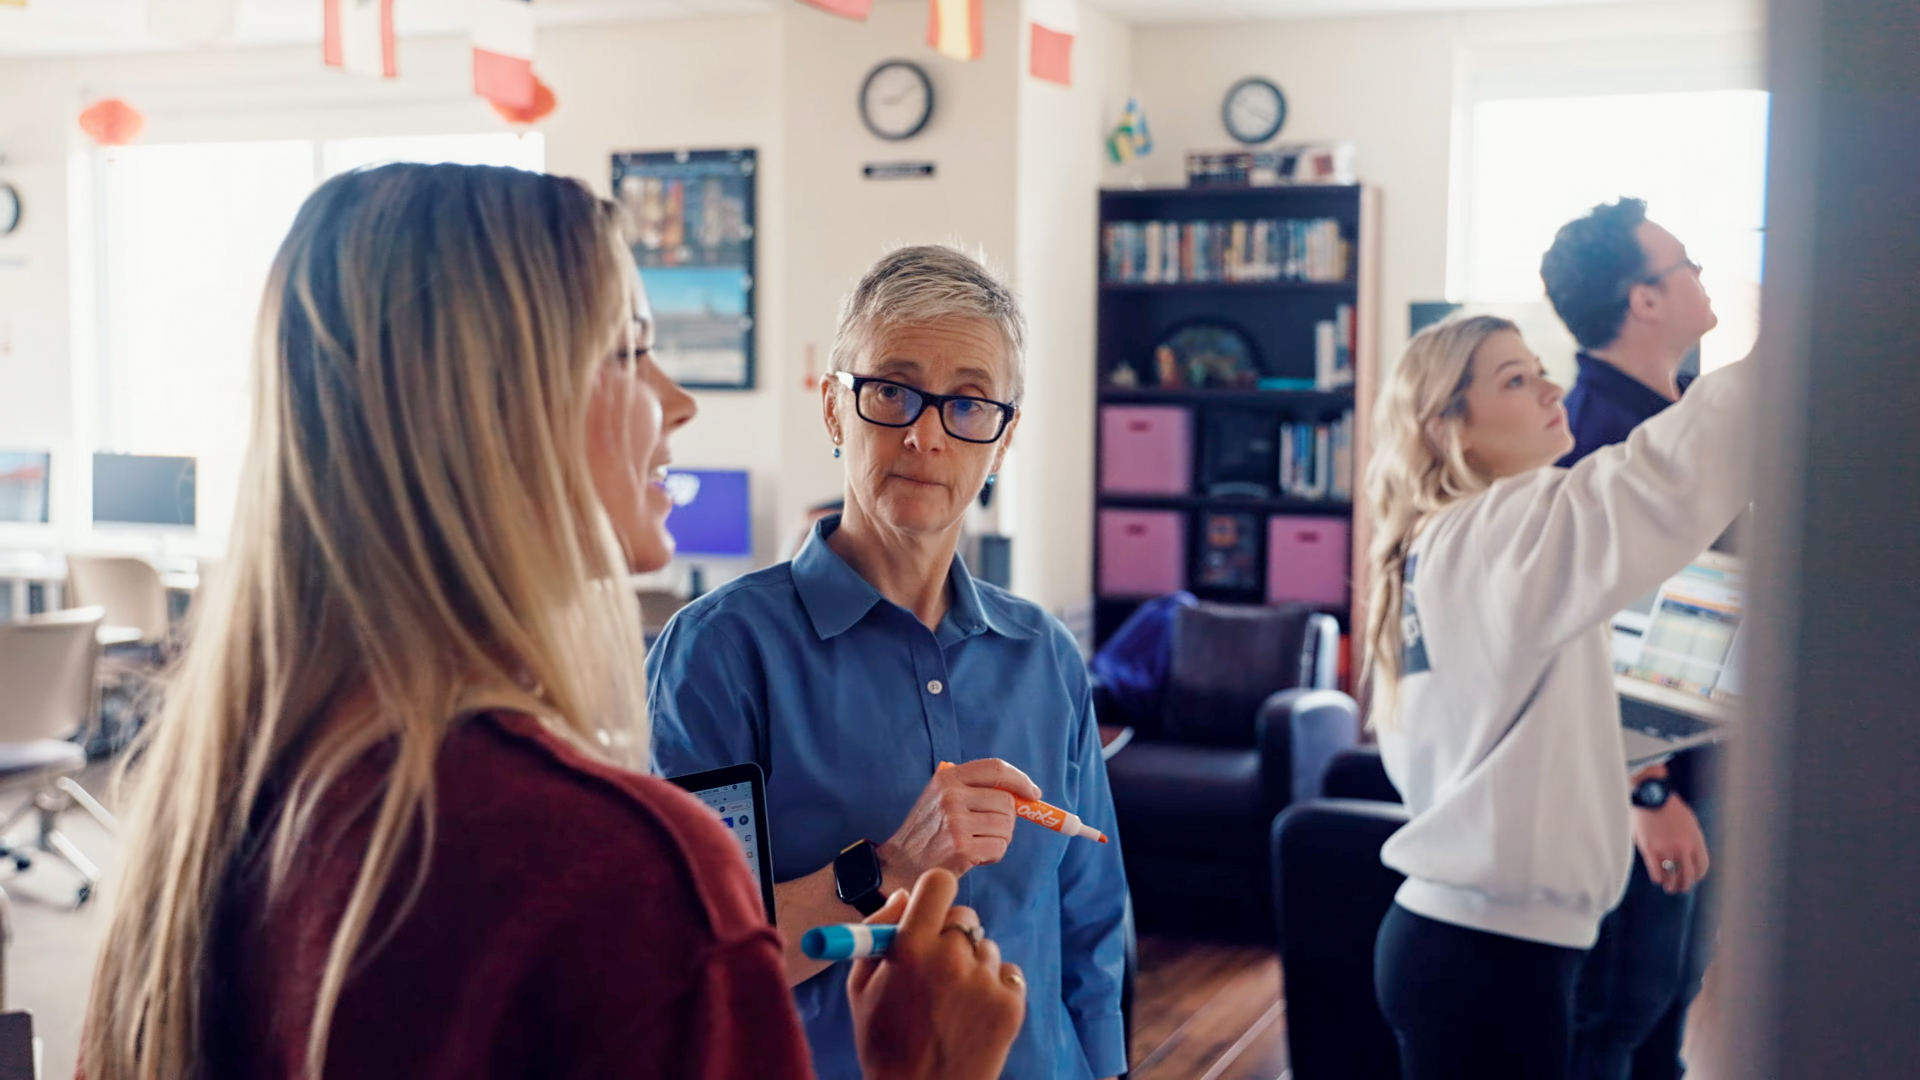 Muriel Cormican, Ph.D., professor of German and chair of the modern language studies department, instructs students in the Center for Languages and Cultures in Scharbauer Hall. Credit TCU Marketing & Communication (2022)